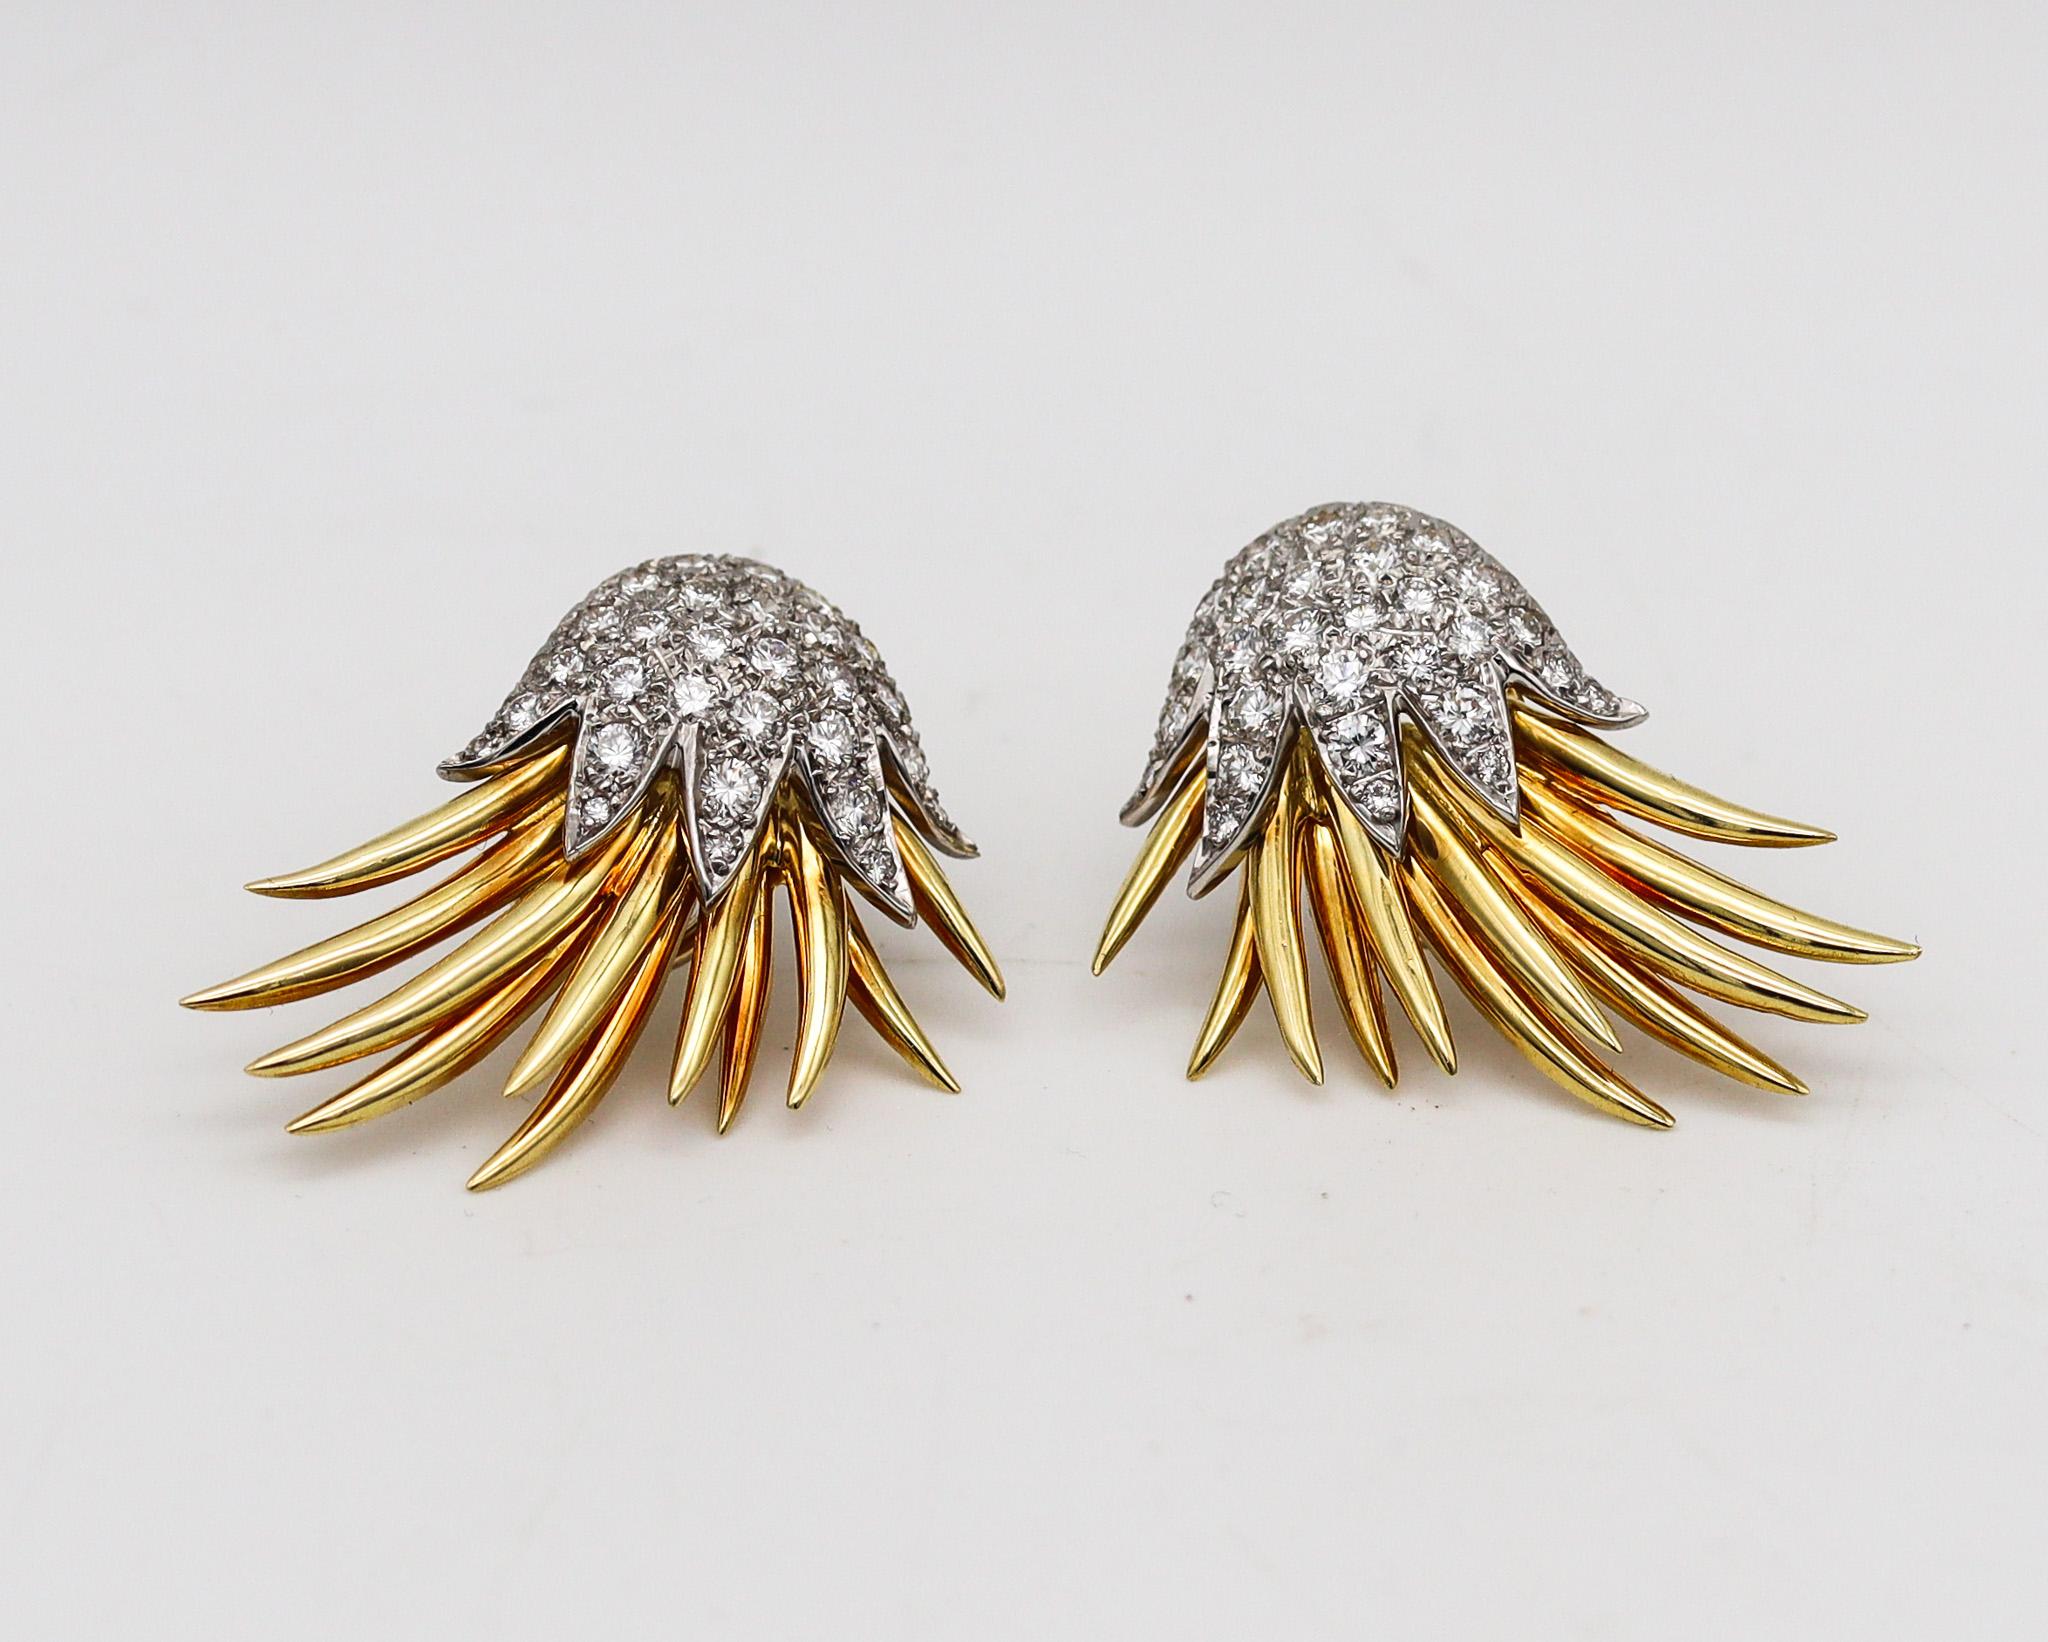 Brilliant Cut Tiffany & Co 1970 Flames Earrings In 18Kt Gold & Platinum With 3.46 Ctw Diamonds